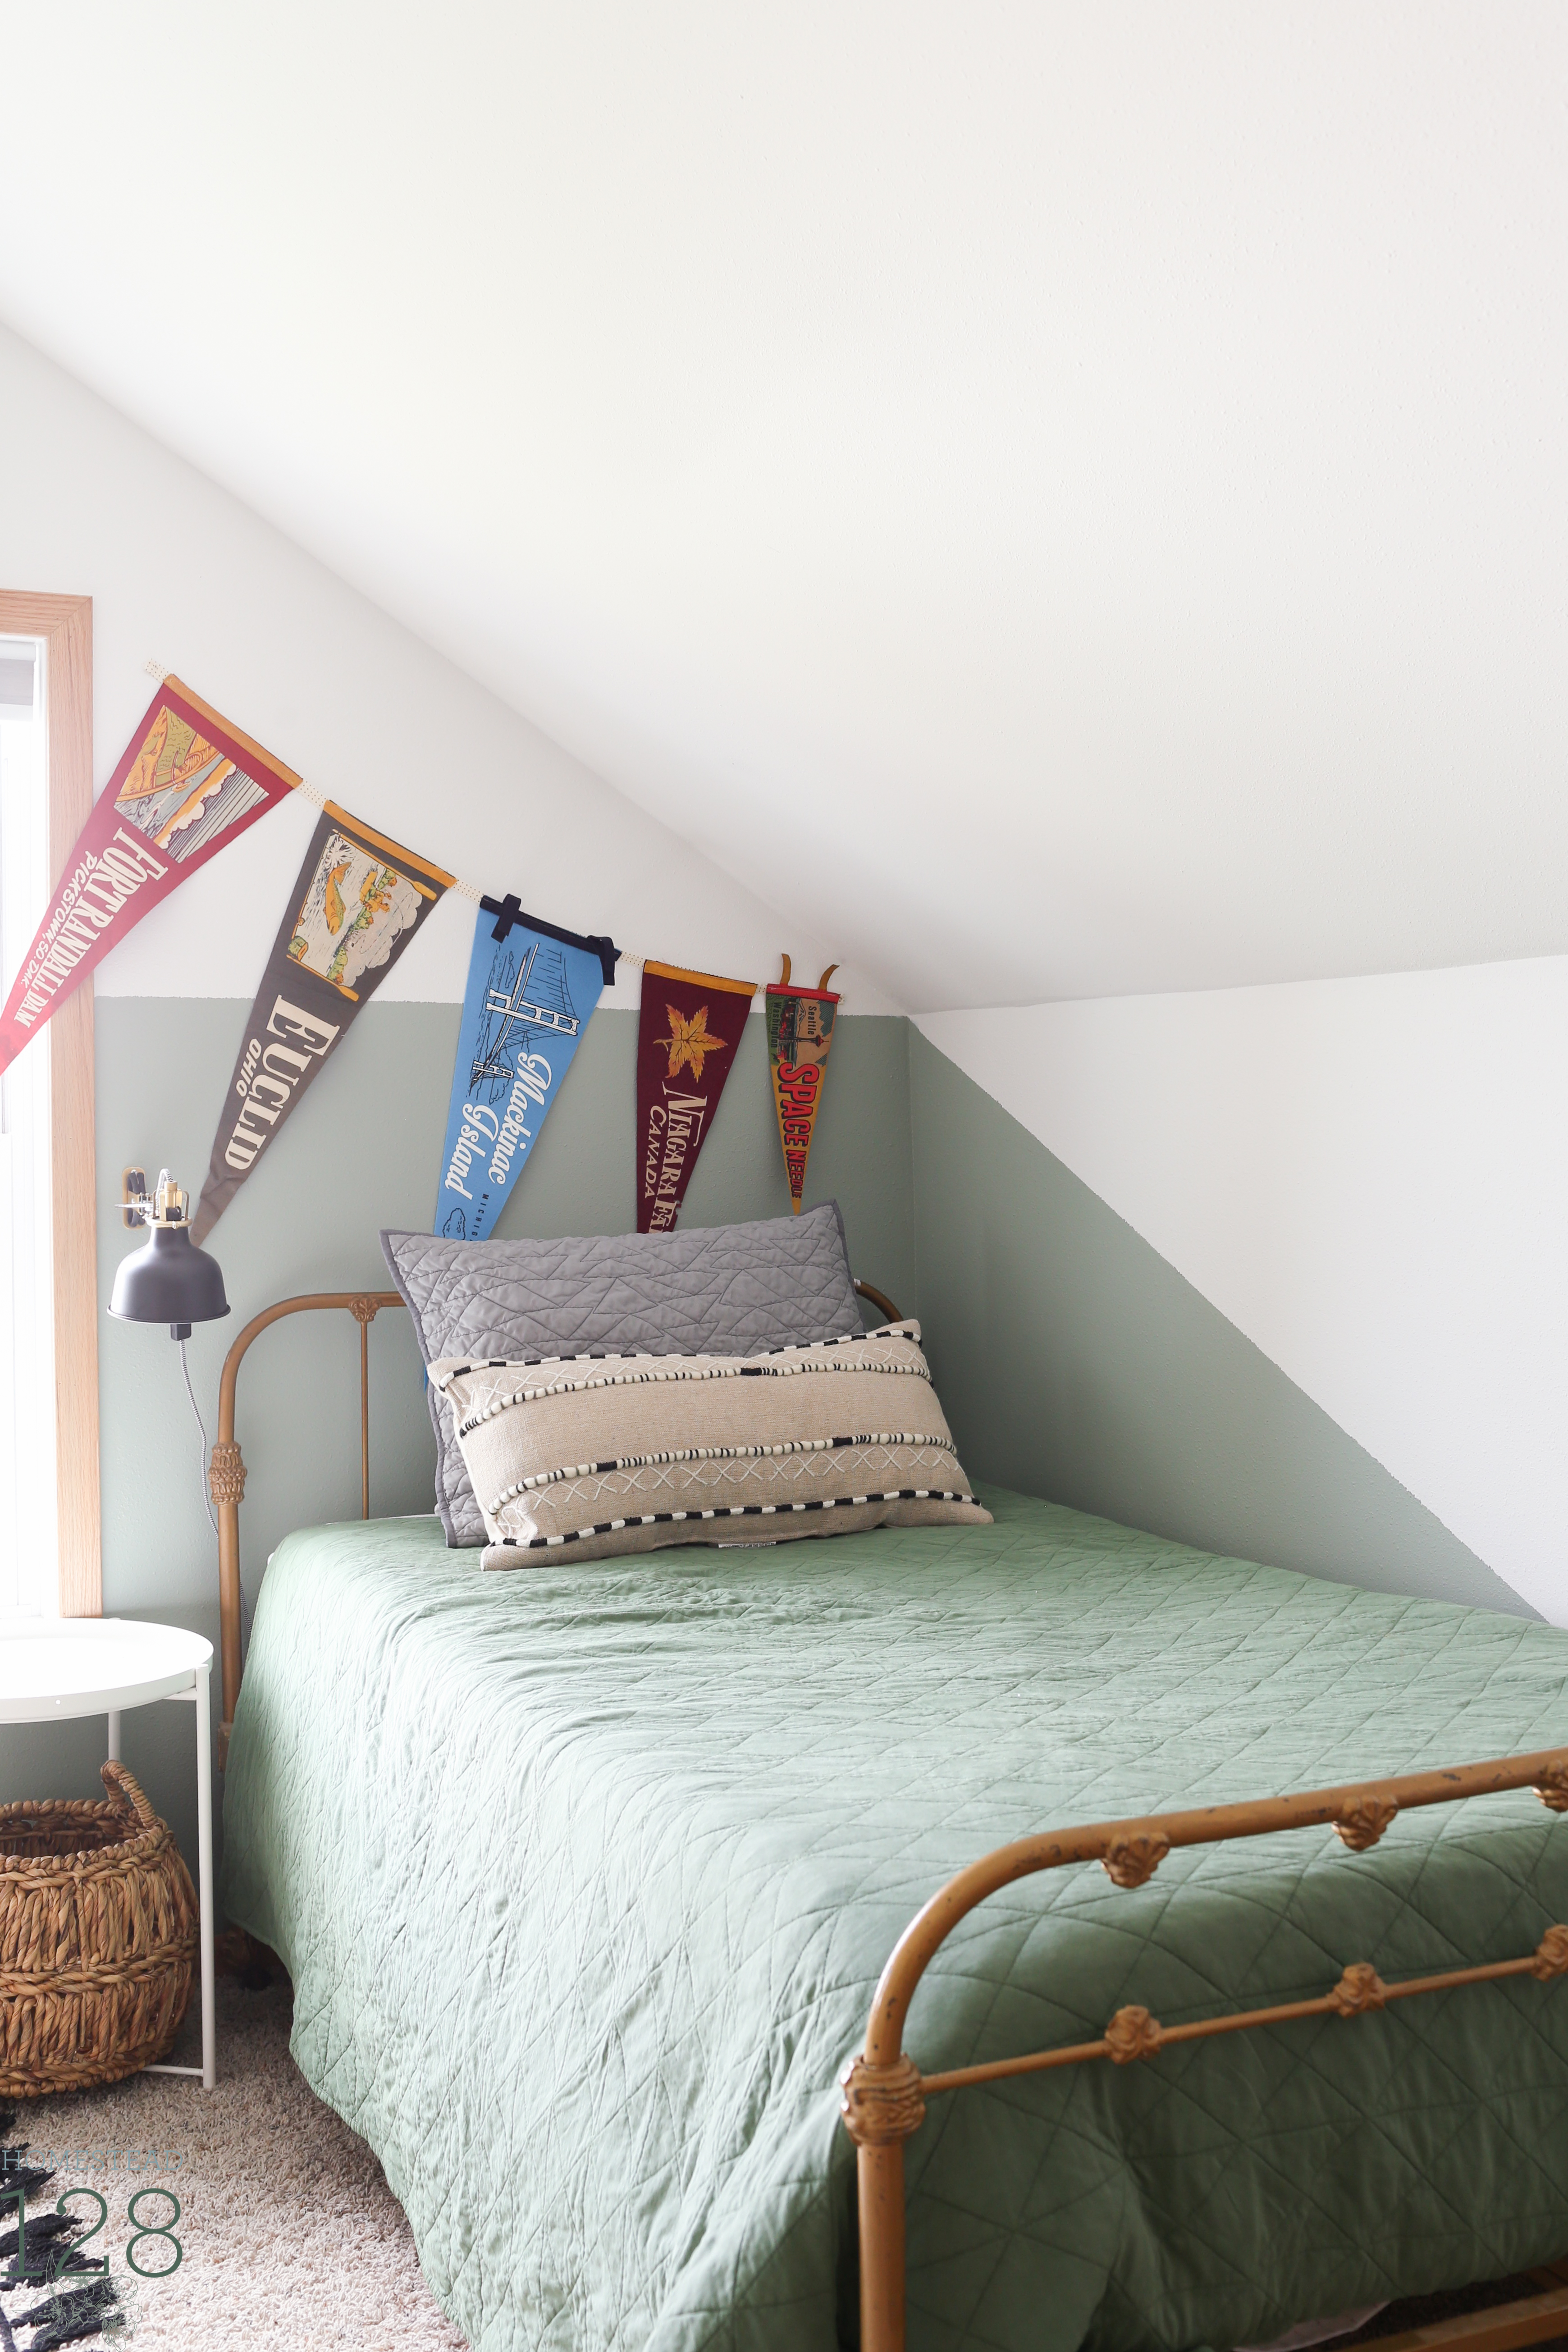 The vintage and playful boys bedroom is full of personal touches, white, black, green and gold.